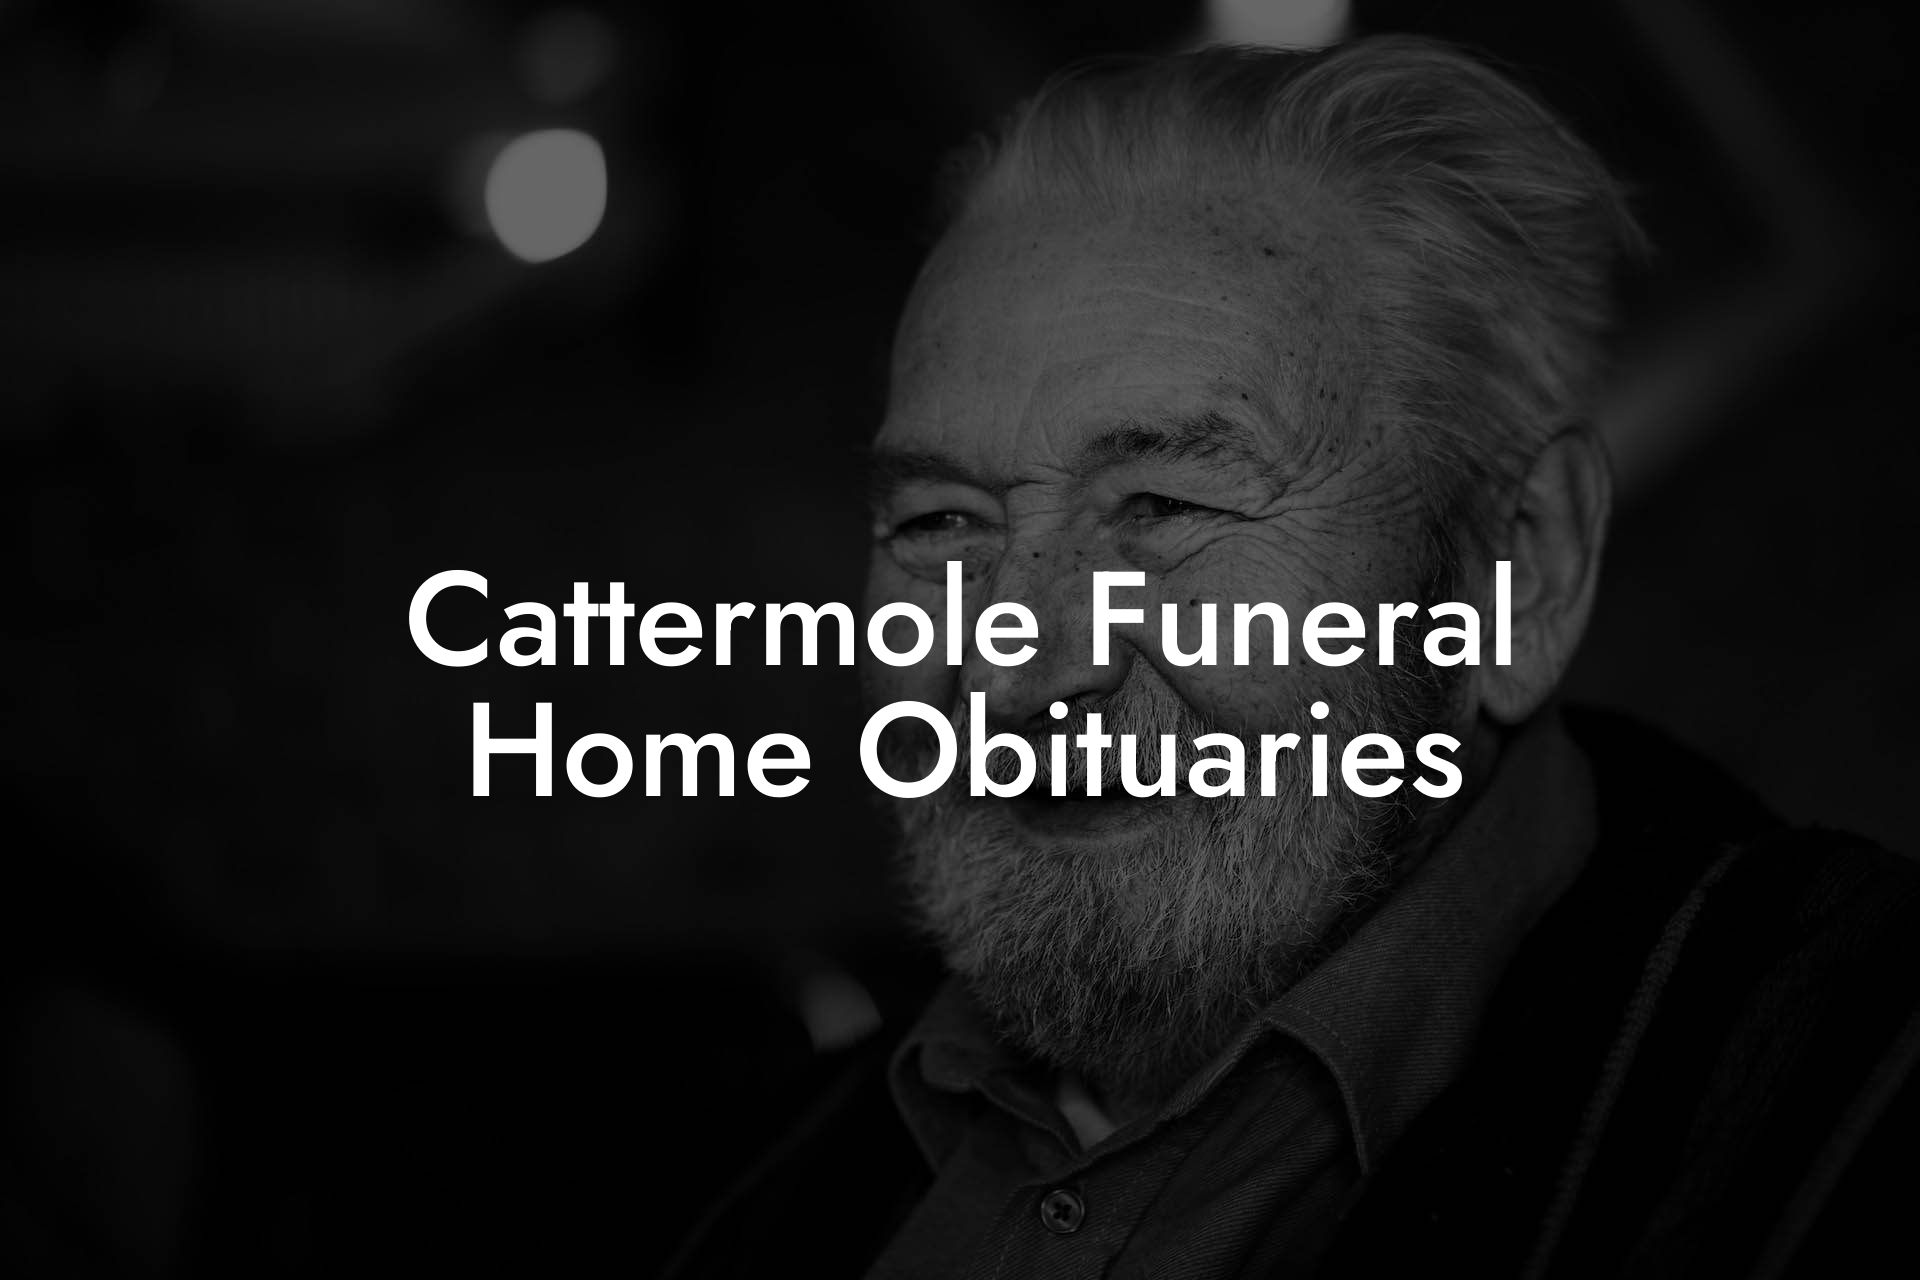 Cattermole Funeral Home Obituaries